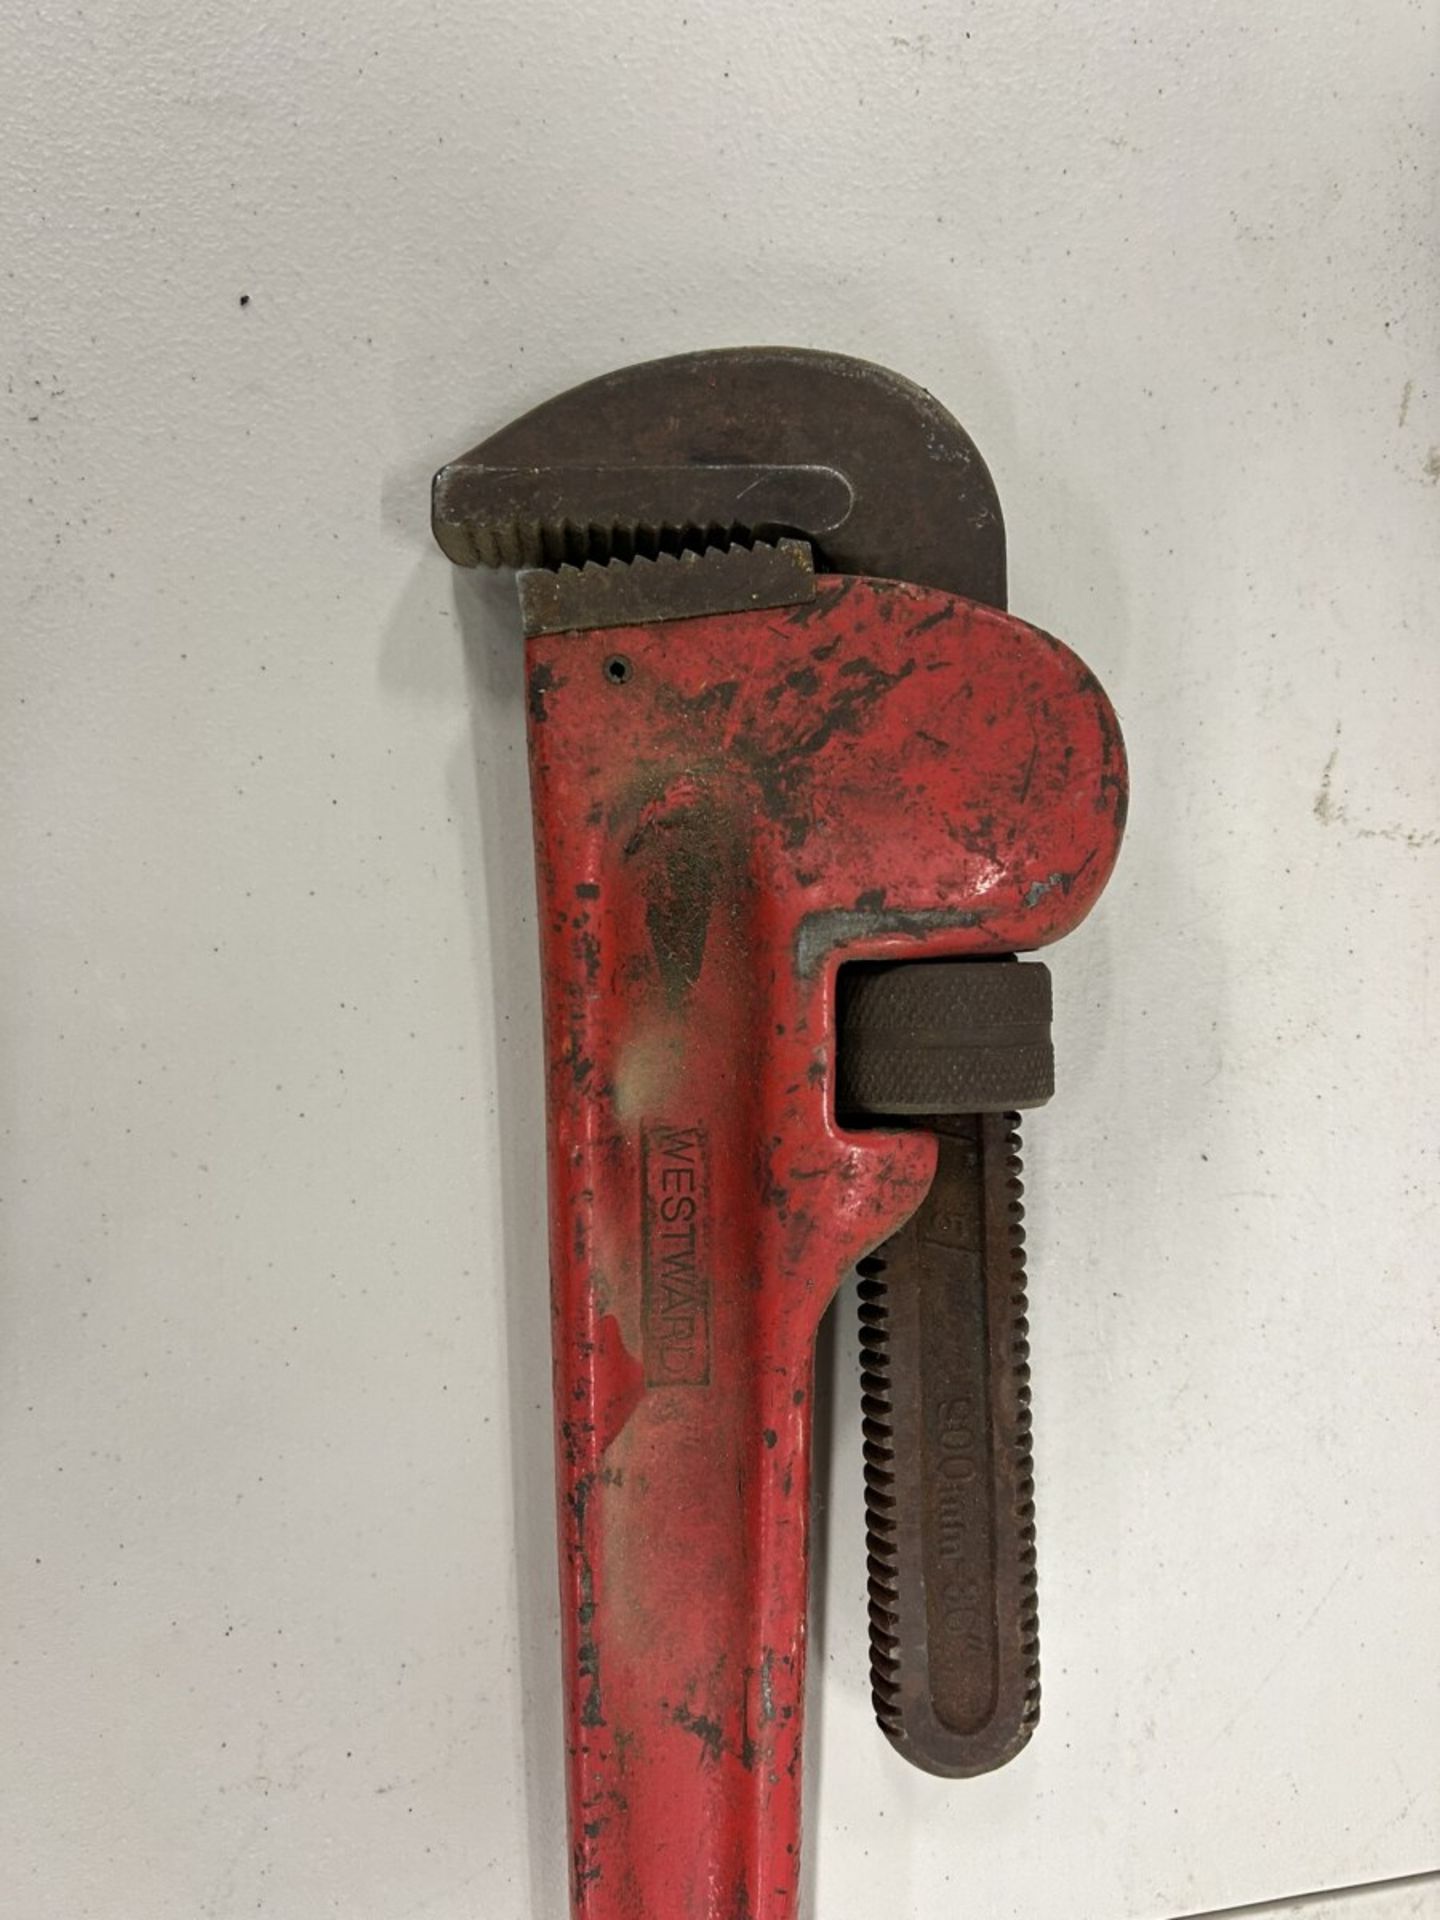 WESTWARD PIPE WRENCH W/ BOLT CUTTERS - Image 2 of 3